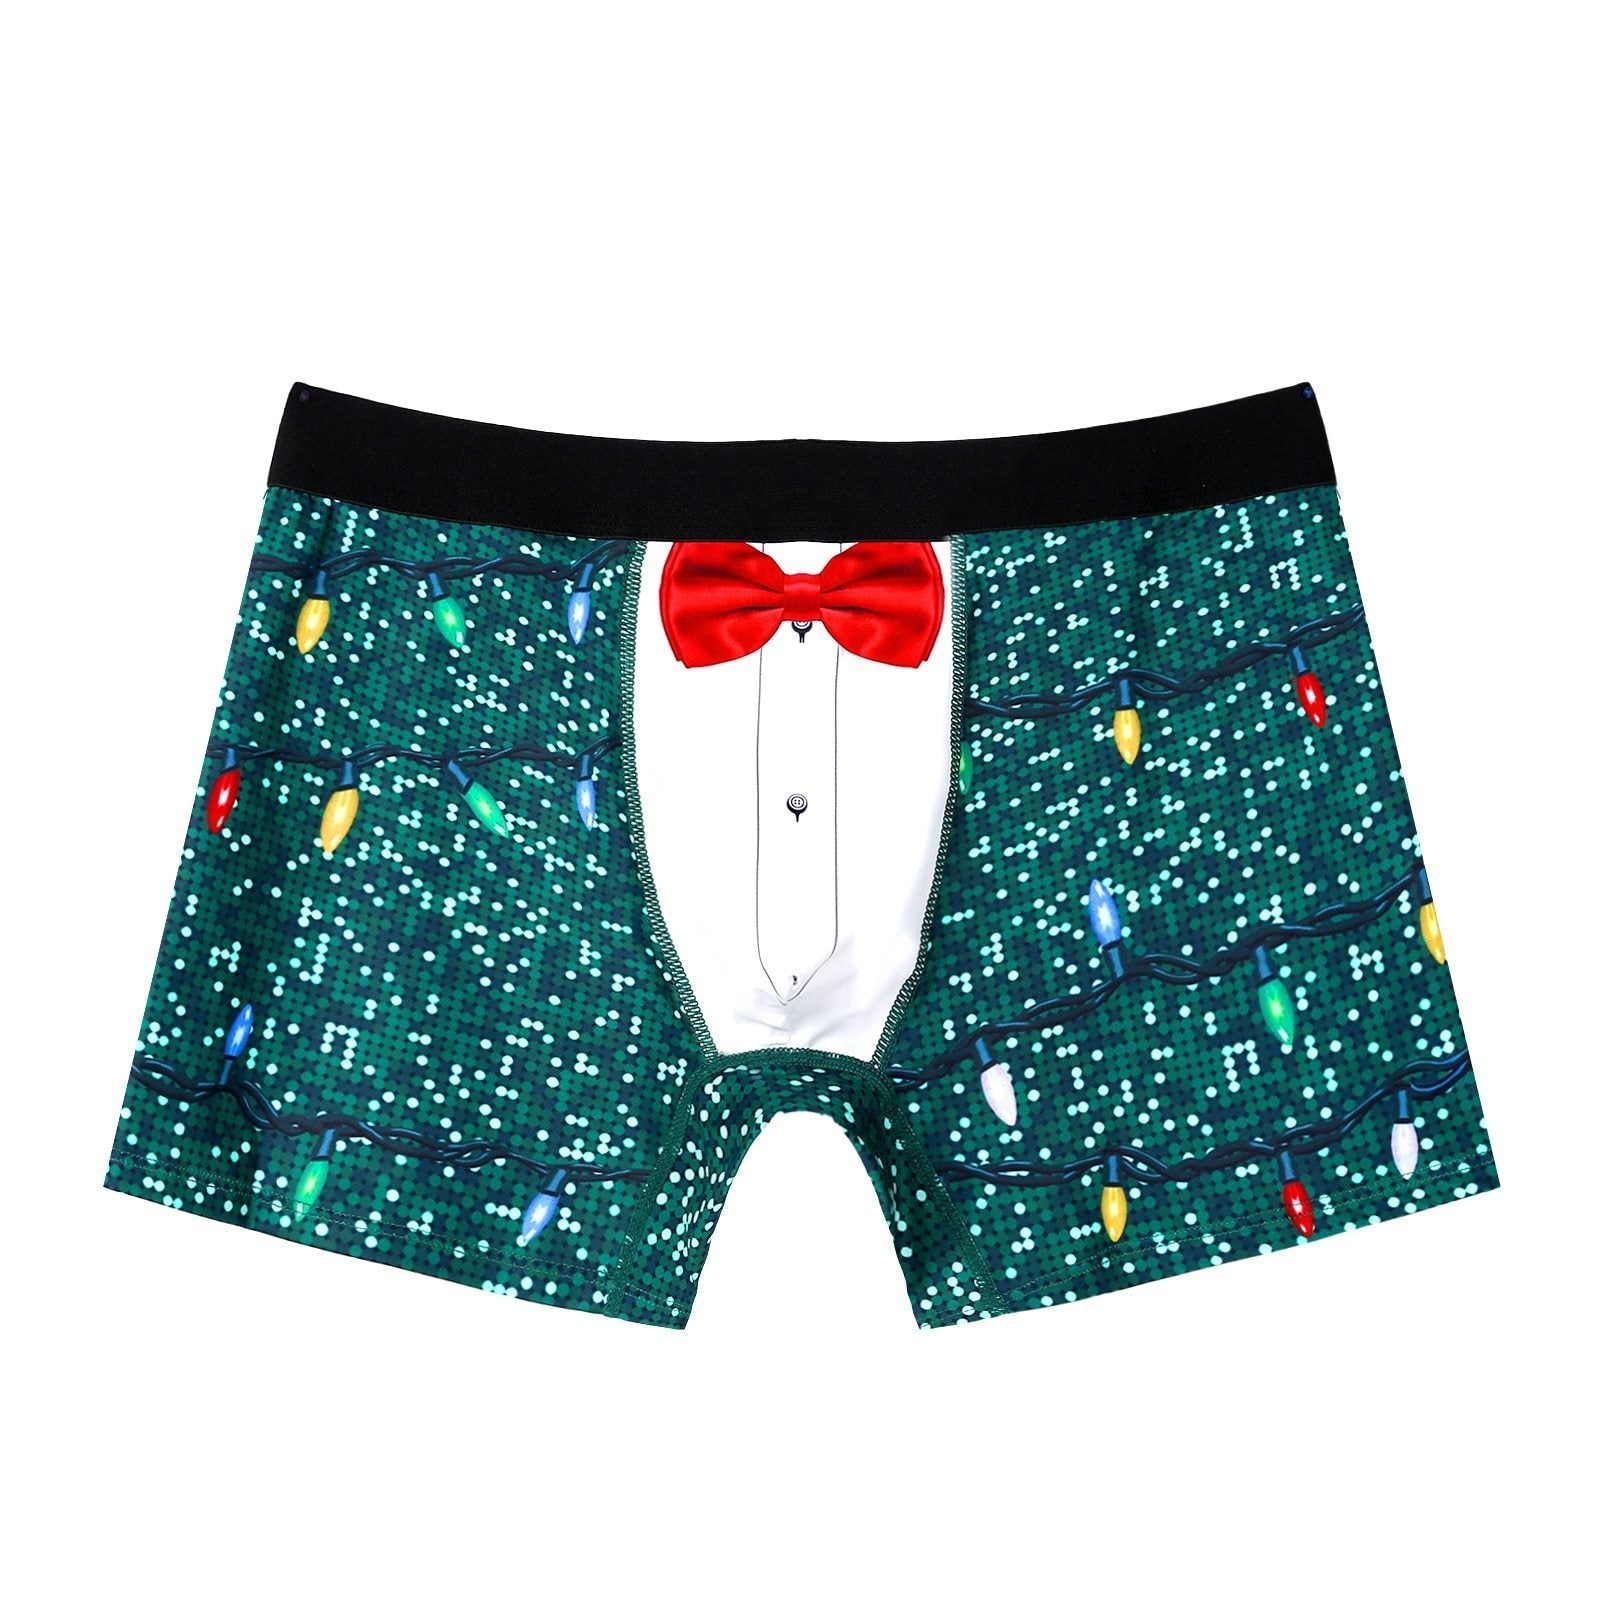 SALE - XMAS GIFT - Mens Christmas or Fun Party Time Boxer Briefs in a